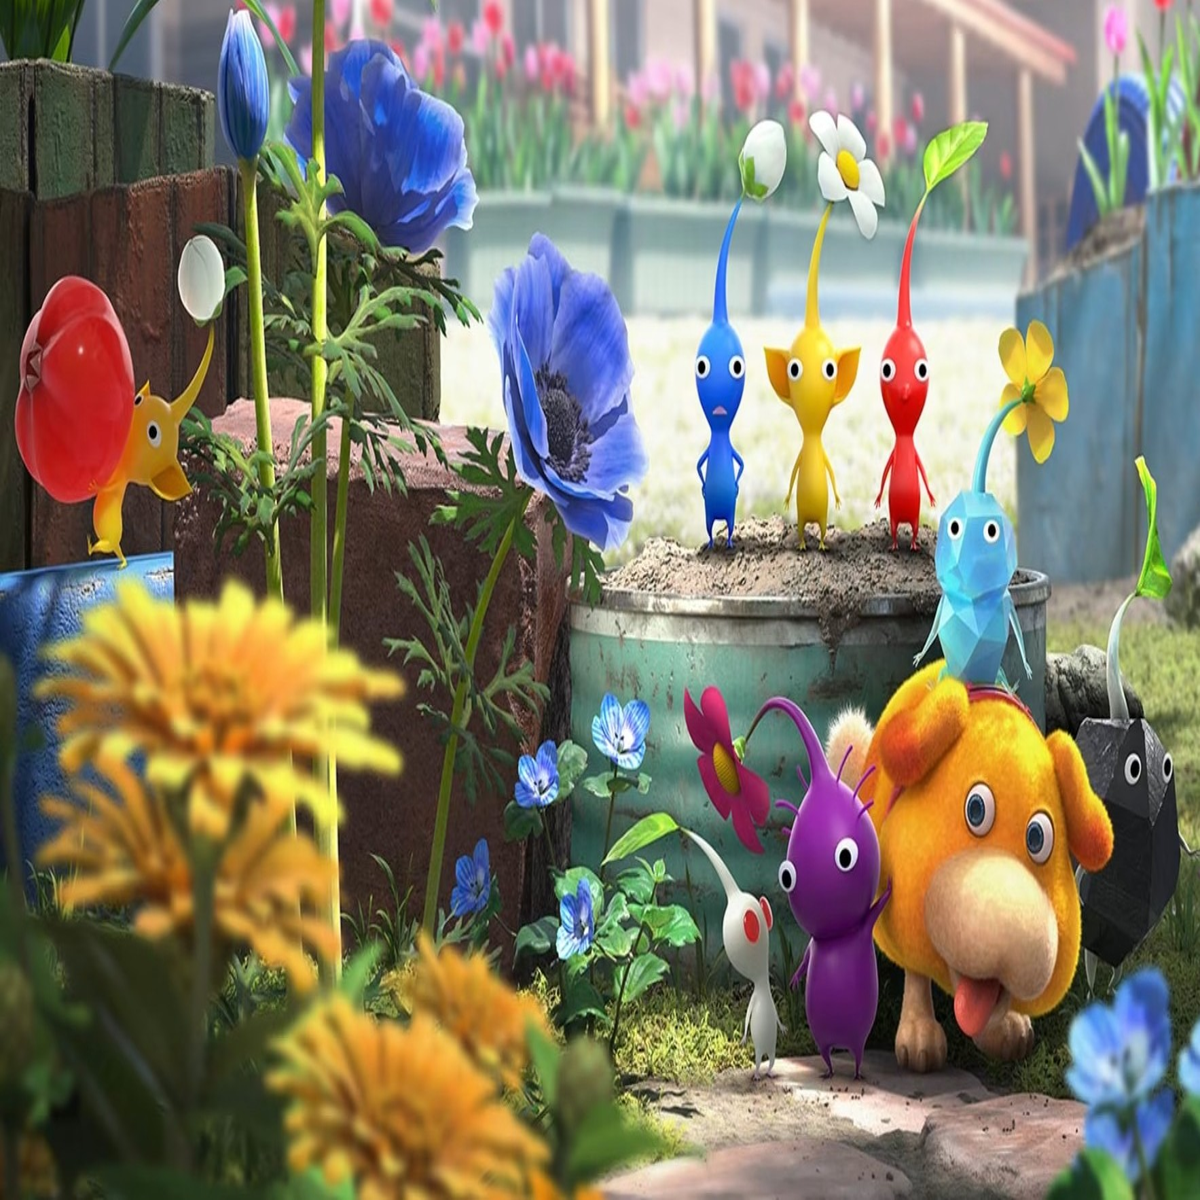 Zelda, Metroid and Pikmin 4: Every Trailer Shown at Nintendo Direct - CNET